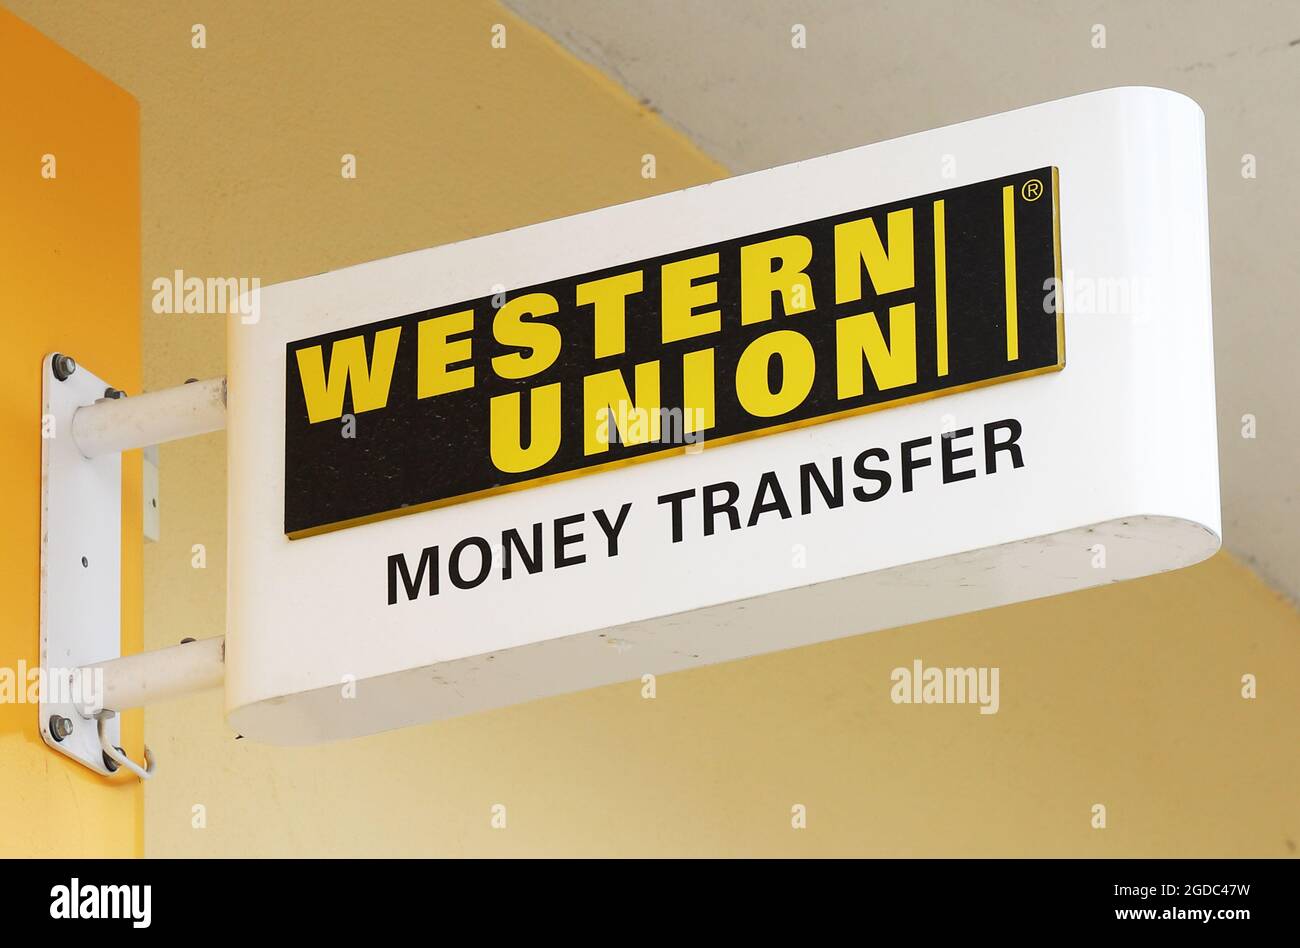 Eskilstuna, Sweden - August 11, 2021: Low angle view of the Western Union money transfer sign. Stock Photo